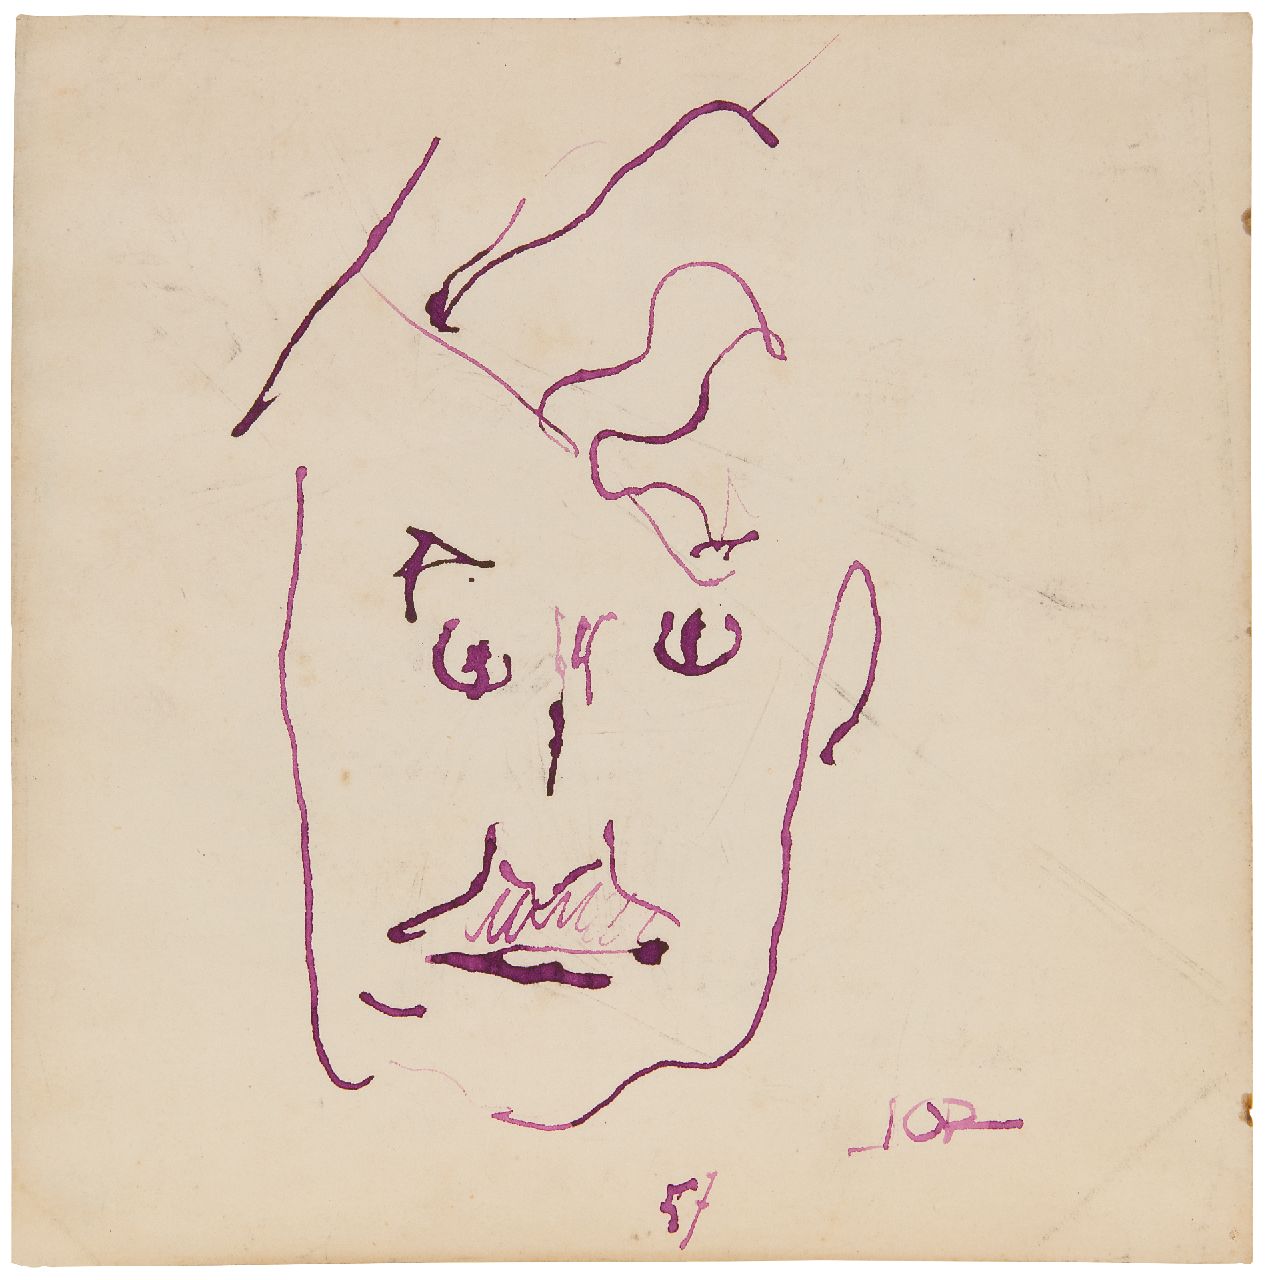 Jan Jordens | Self portrait of the artist, ink on paper, 26.7 x 26.4 cm, signed l.r. and dated '57